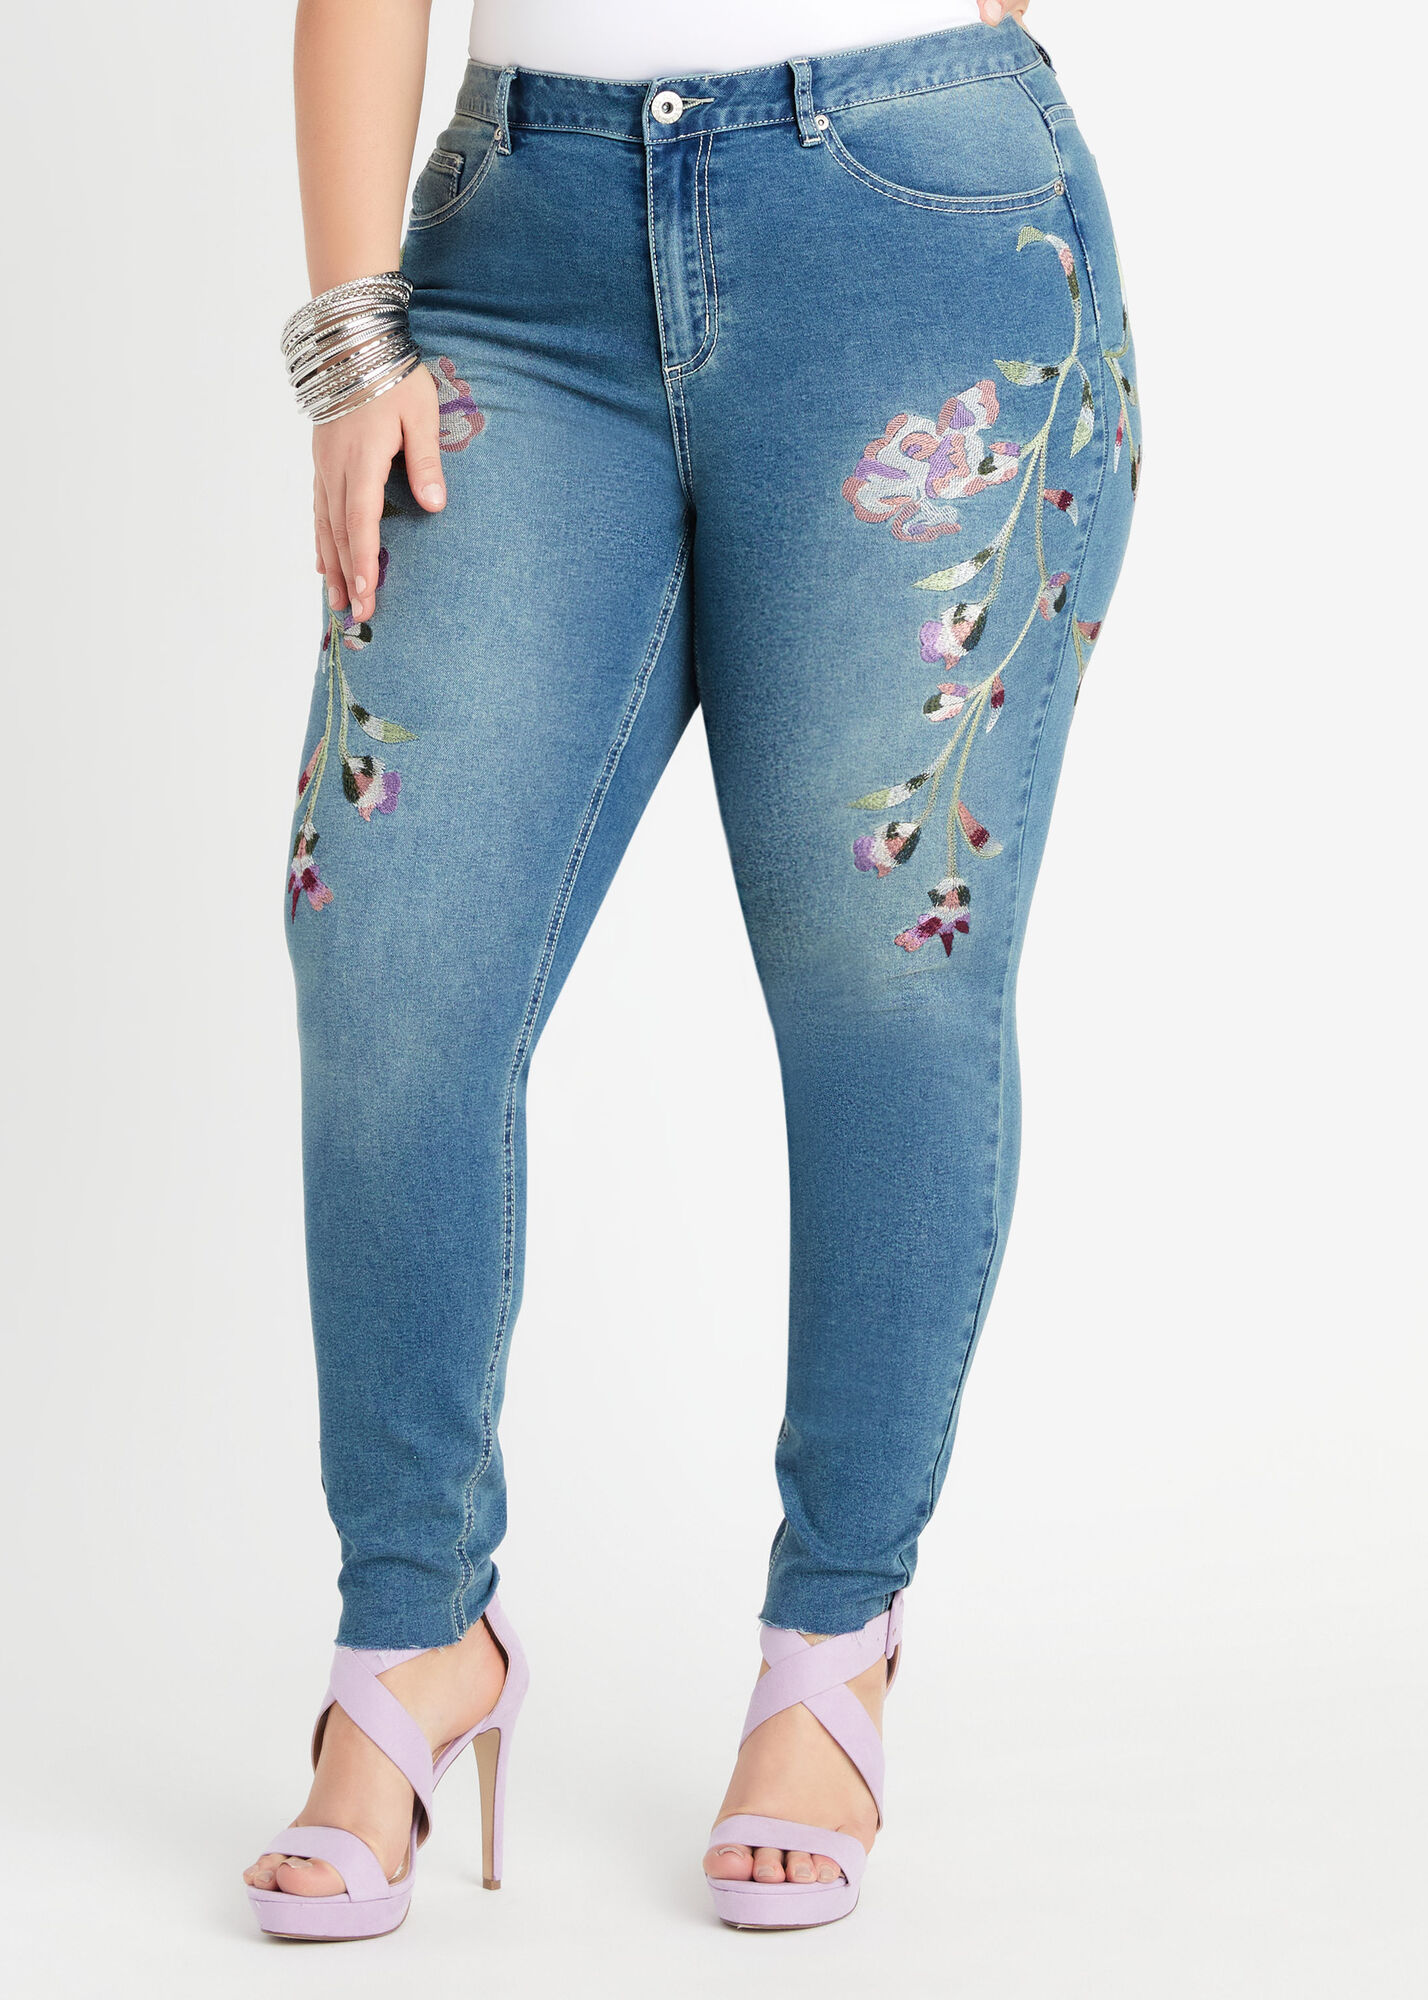 Uovertruffen skrot rent Plus Size High Waist Skinny Jeans Plus Size Floral Raw Edge Jeans 2pc